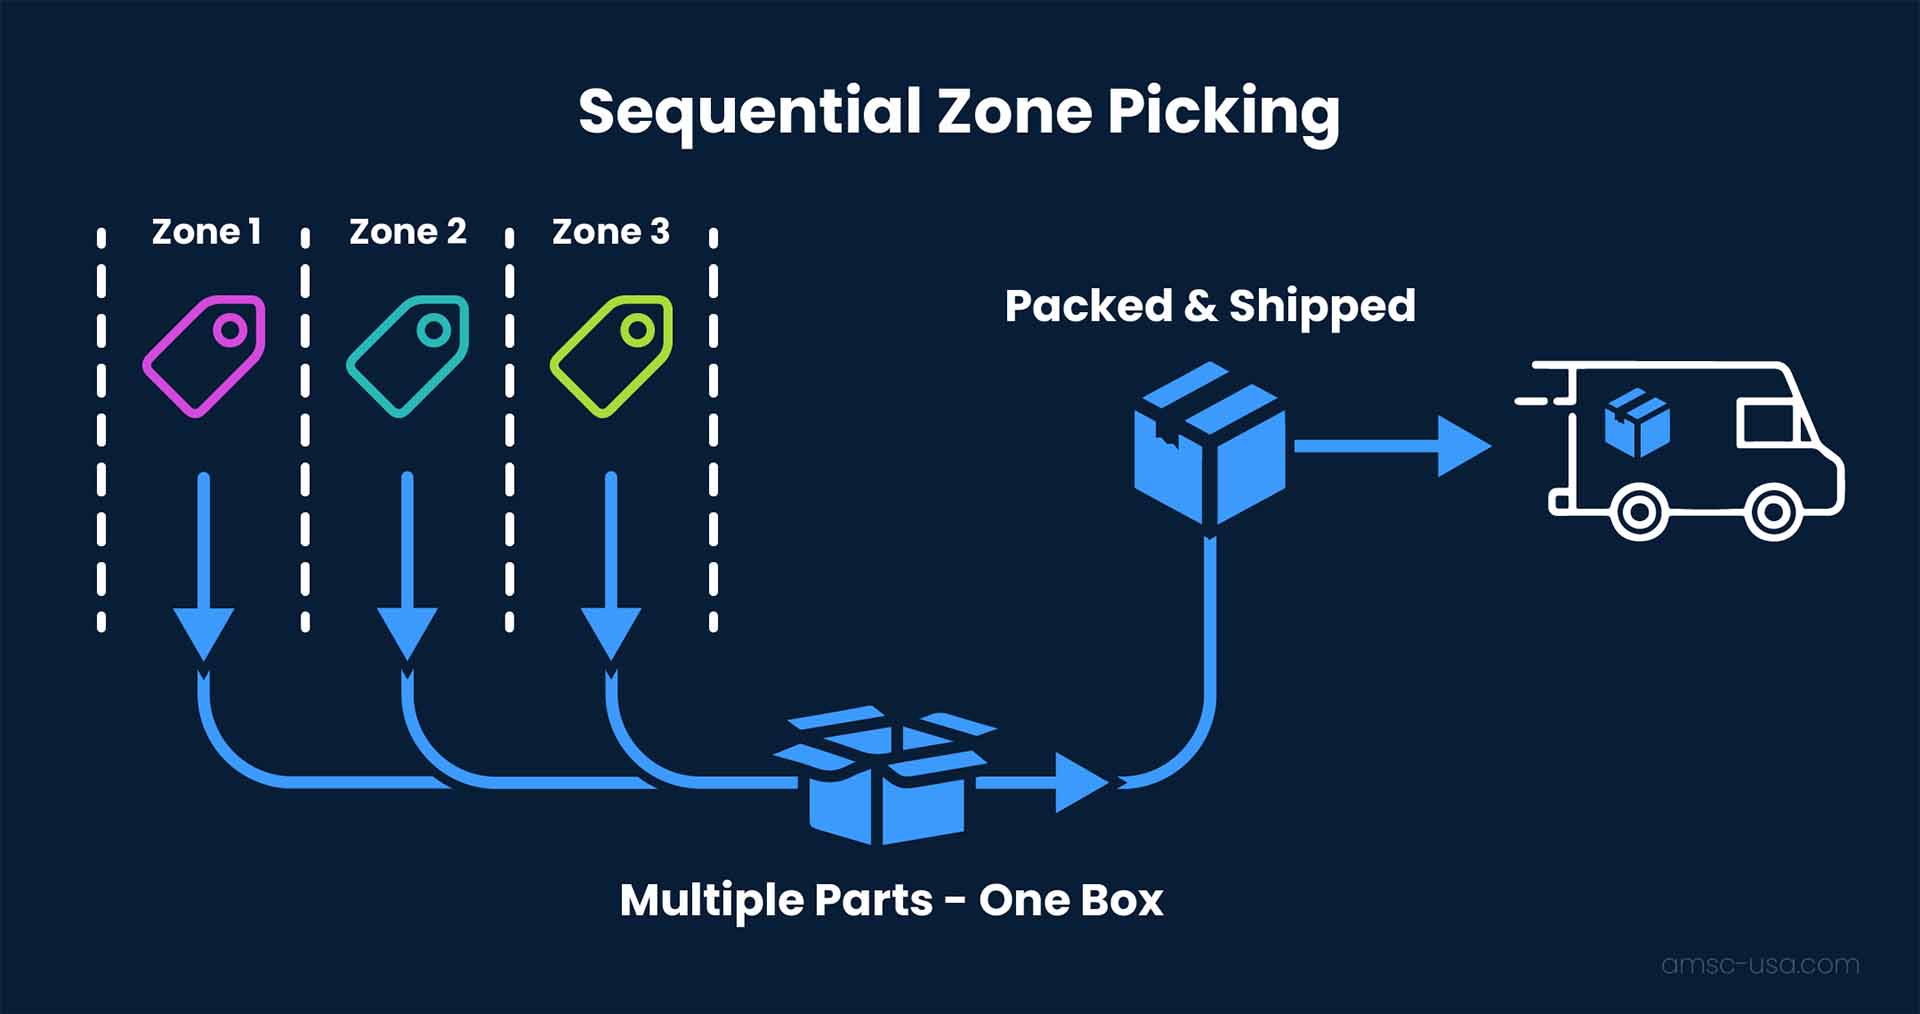 A graphic showing the workflow of sequential zone picking